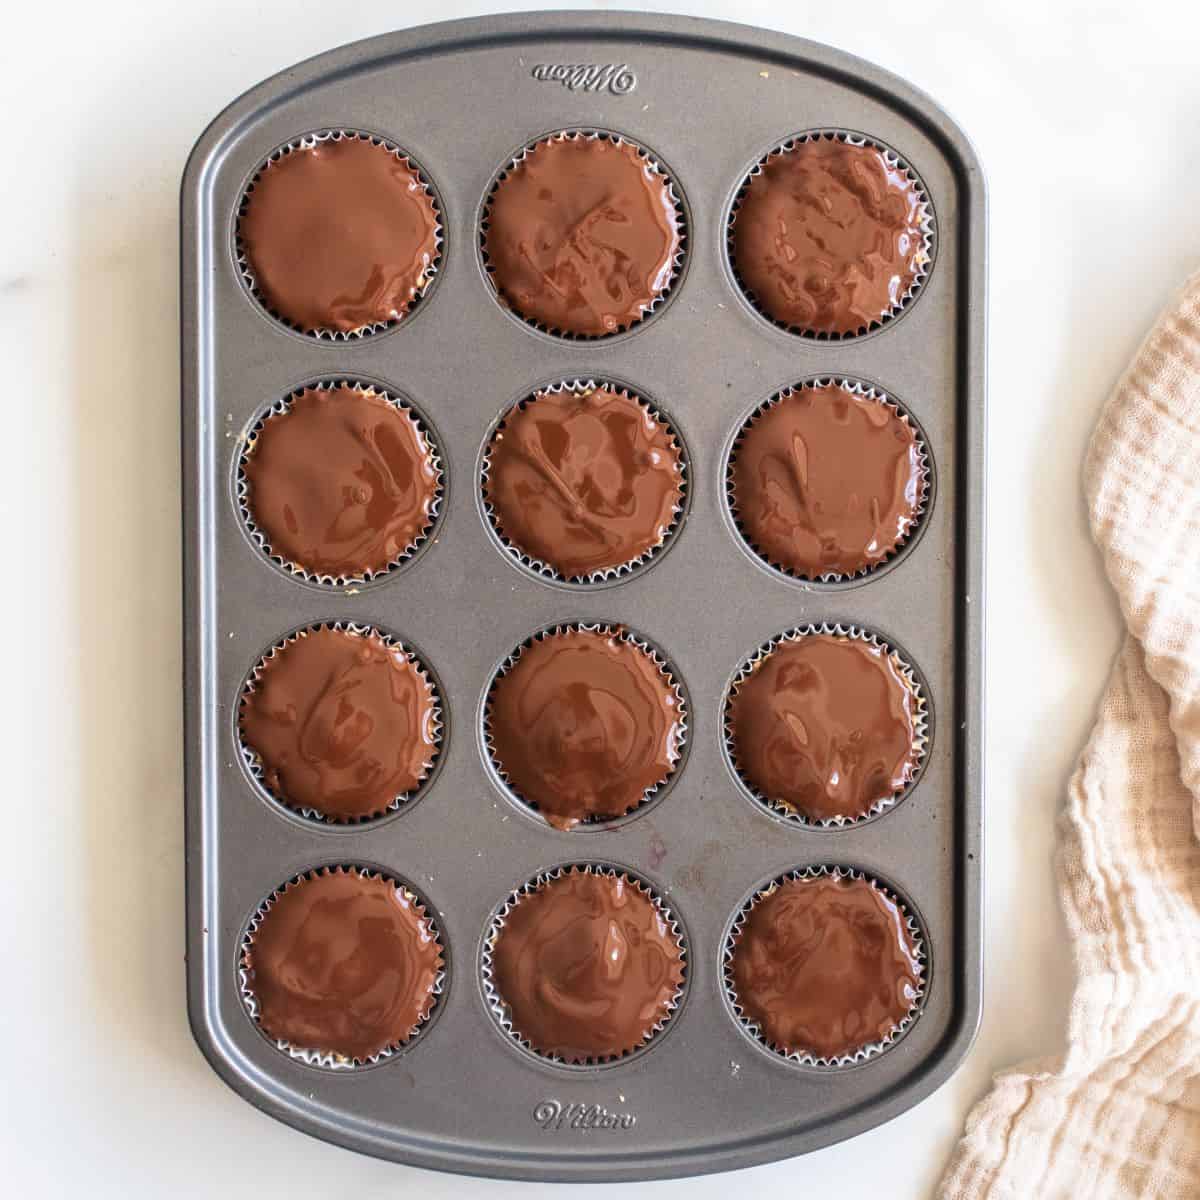 Overhead view of quinoa bites in a lined muffin tin setting on a countertop showing glinting melted chocolate.